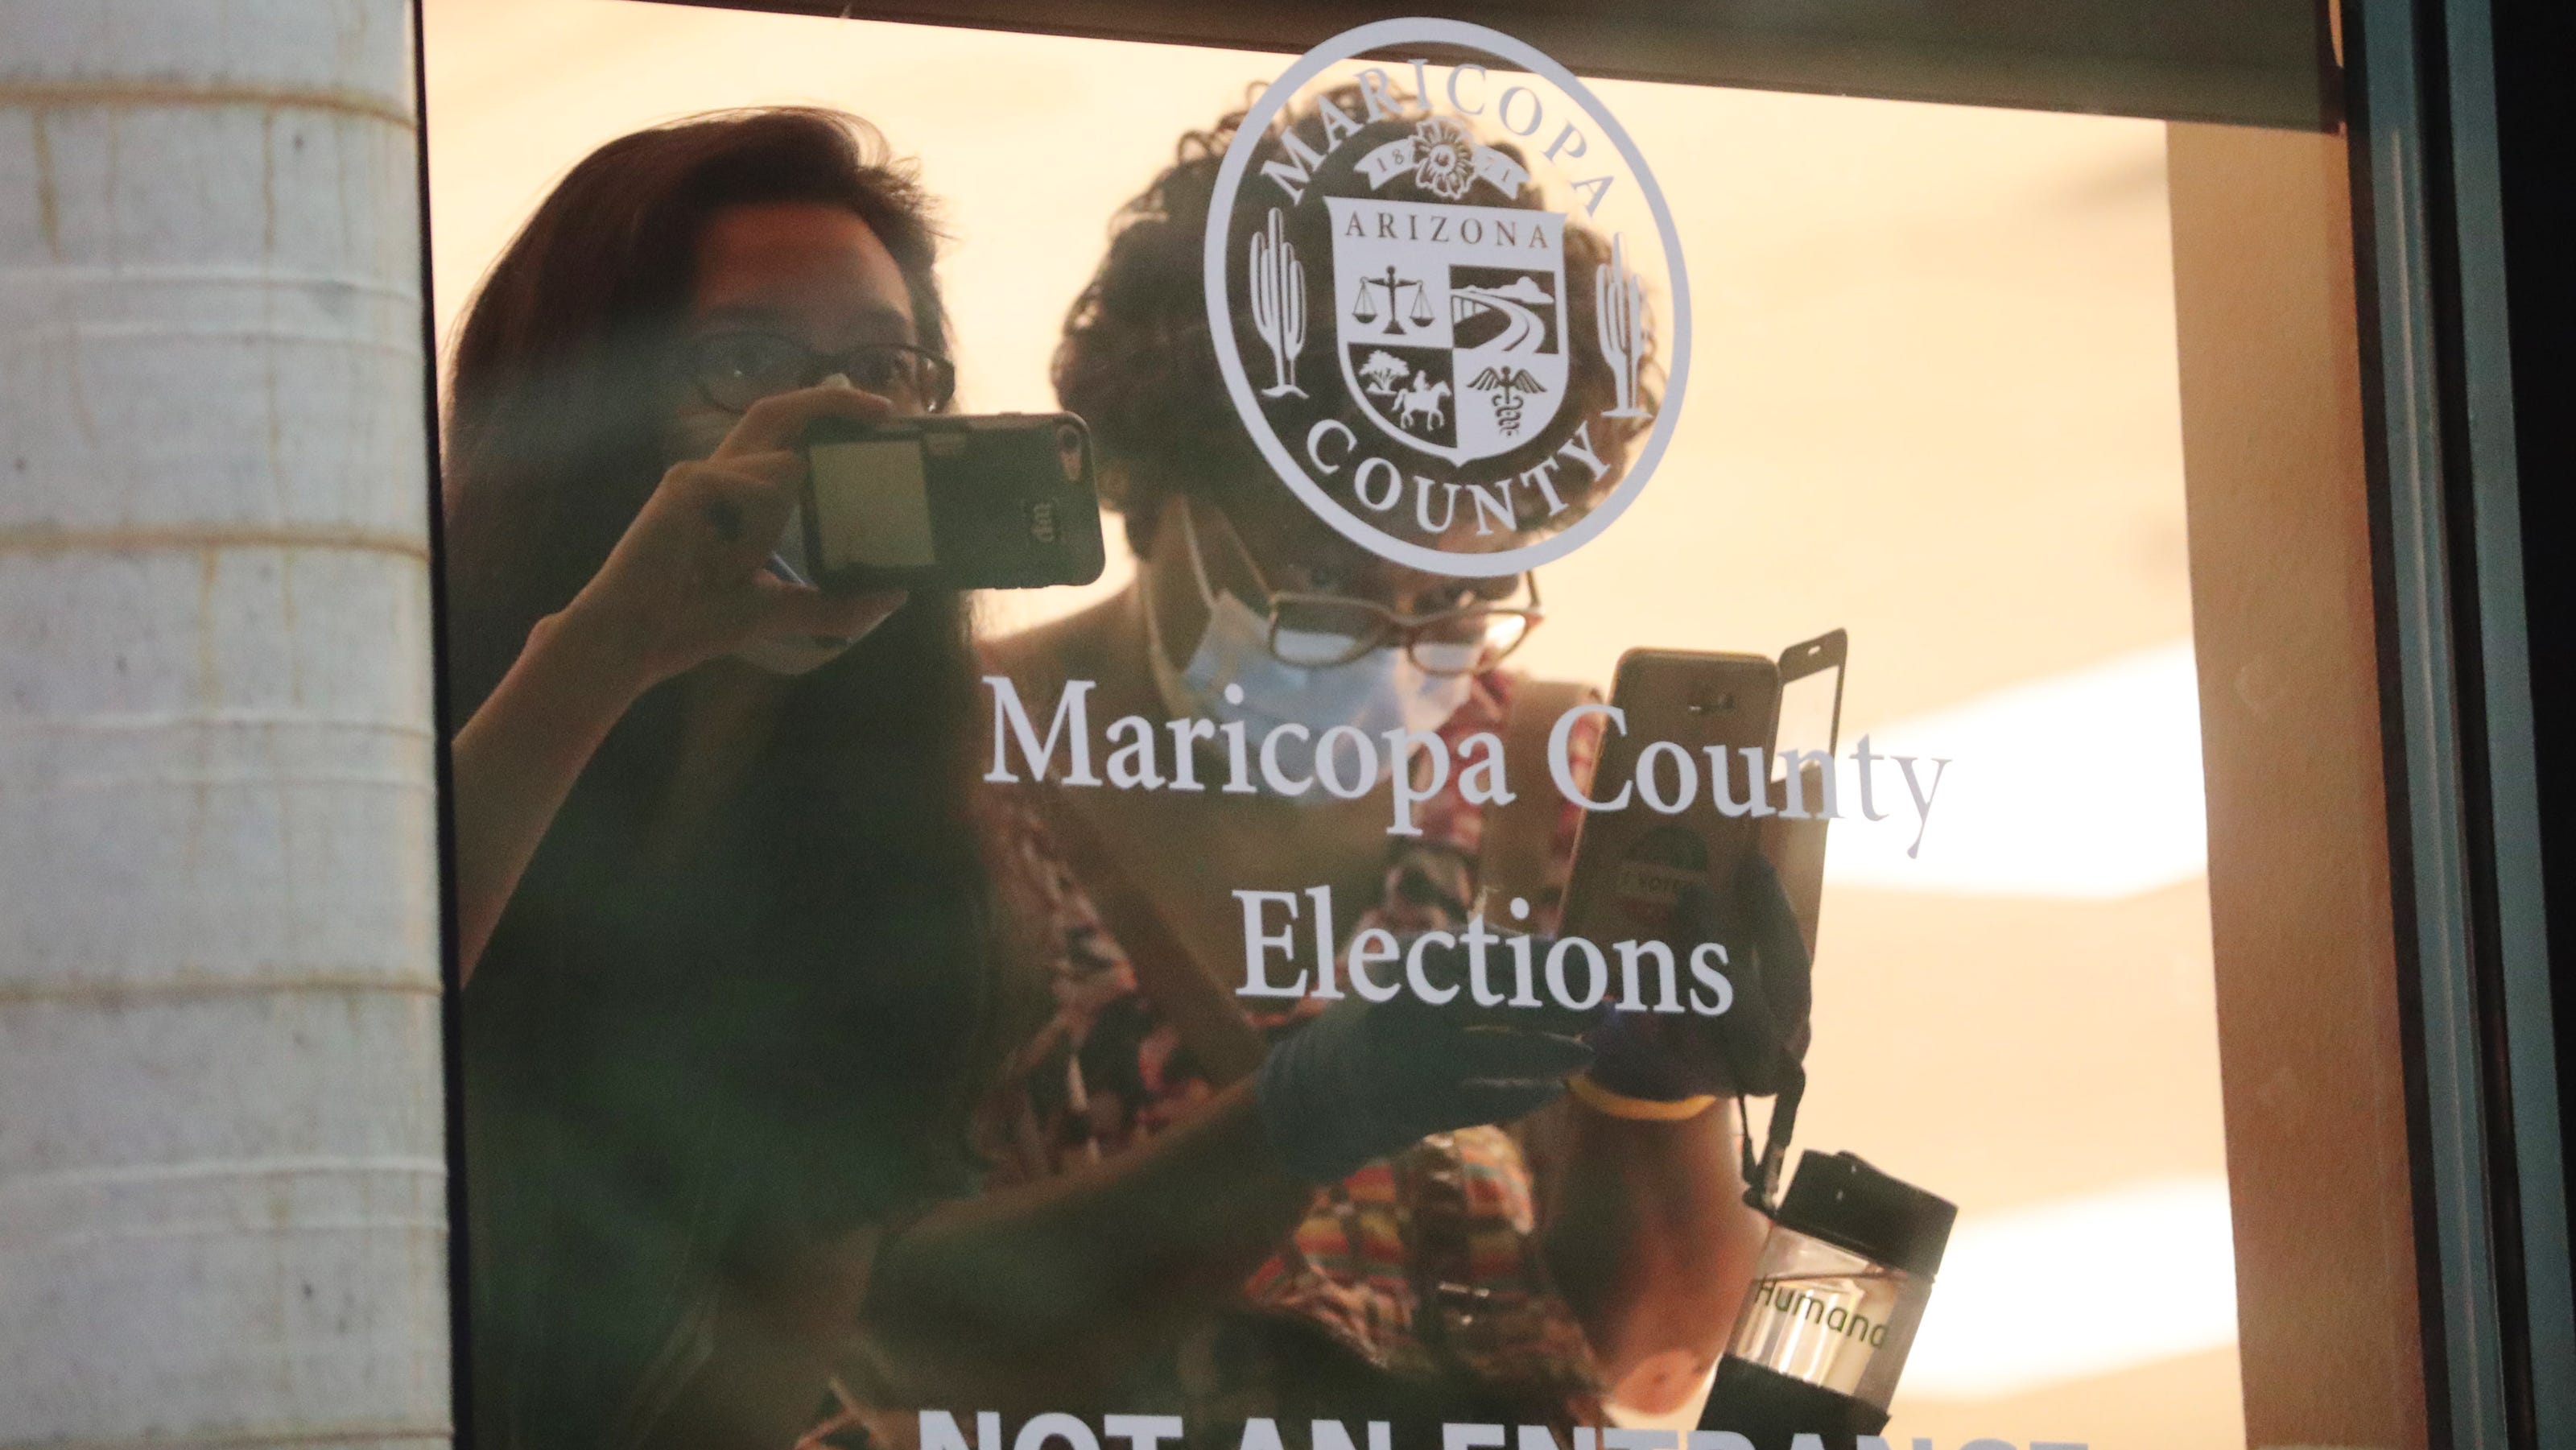 Arizona election Updates from the 2020 presidential election